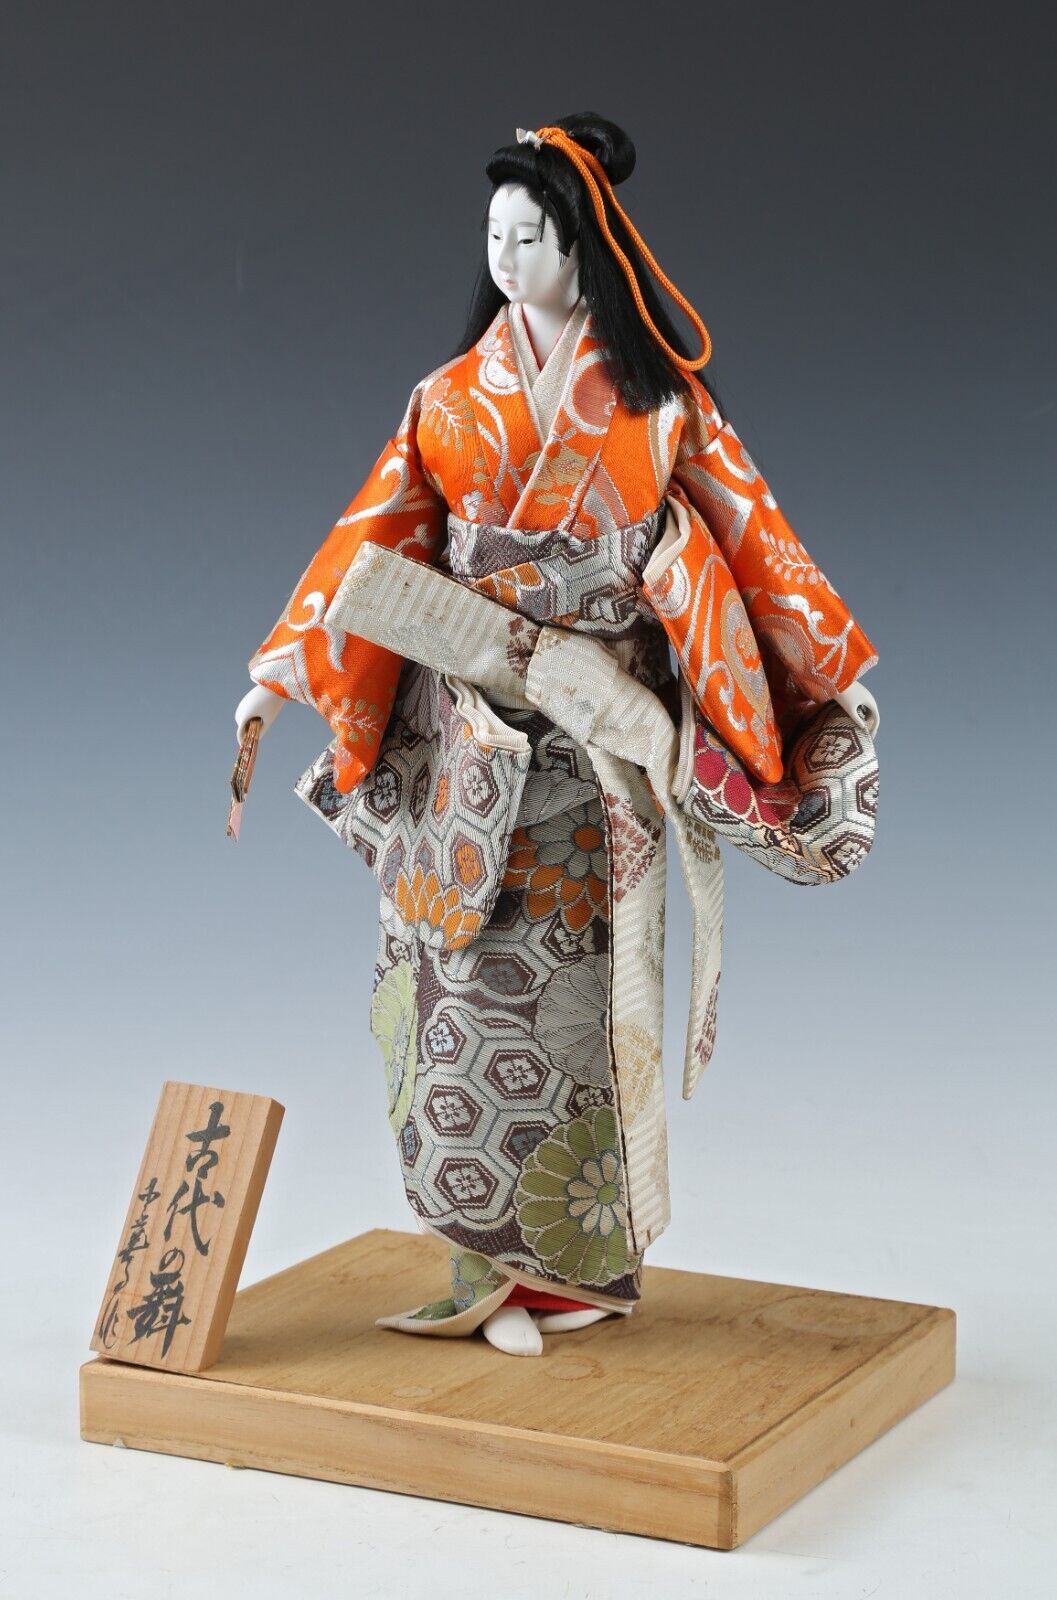 Cute Japanese Vintage Geisha Doll in Traditional Kimono Clothing Ethic Asian Art Collectible Decor.